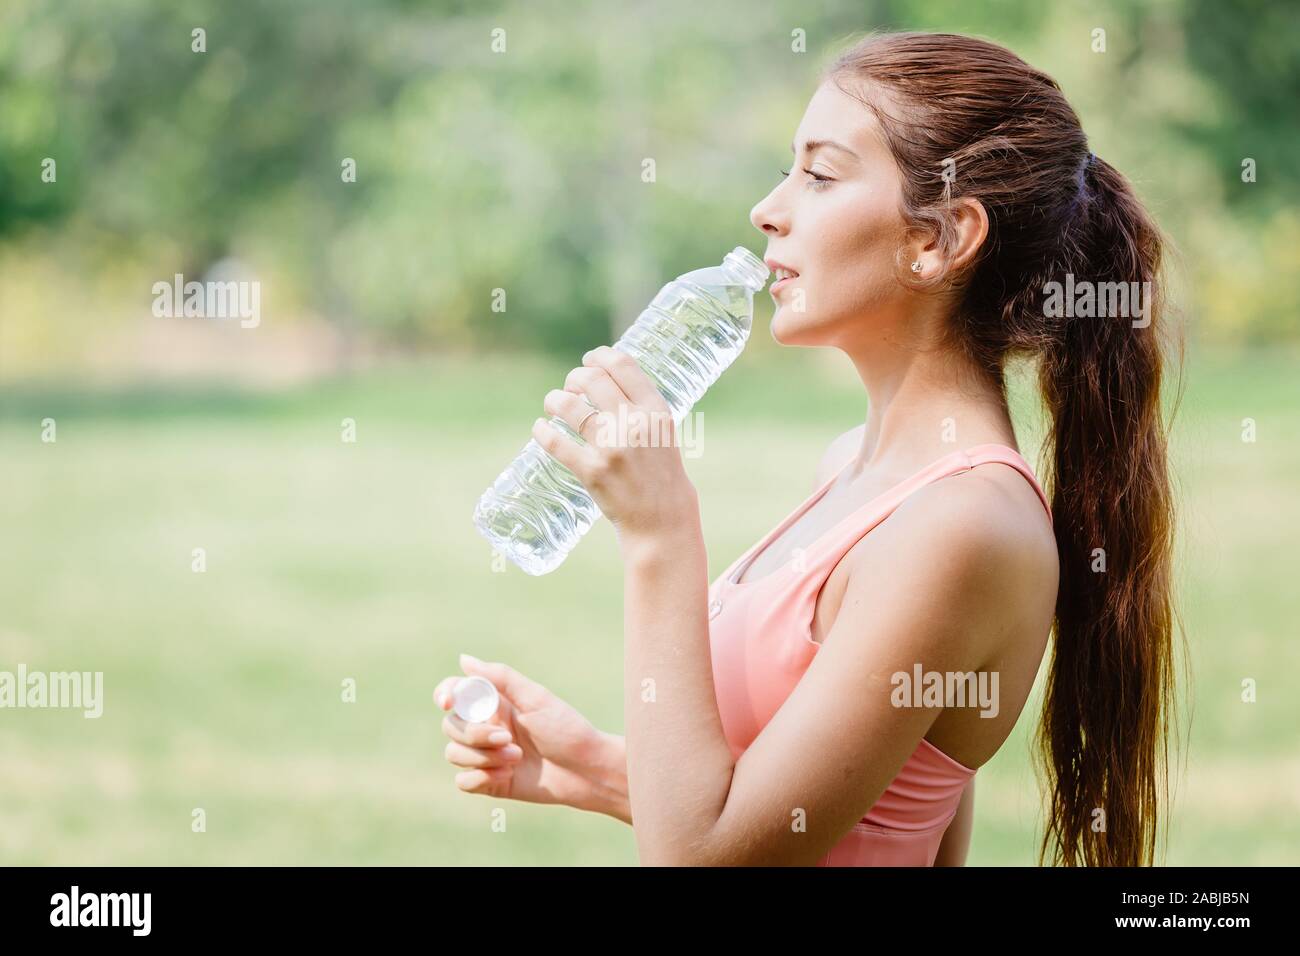 https://c8.alamy.com/comp/2ABJB5N/thirsty-beautiful-sport-women-model-handle-drink-clean-drinking-water-outdoor-after-exercise-2ABJB5N.jpg